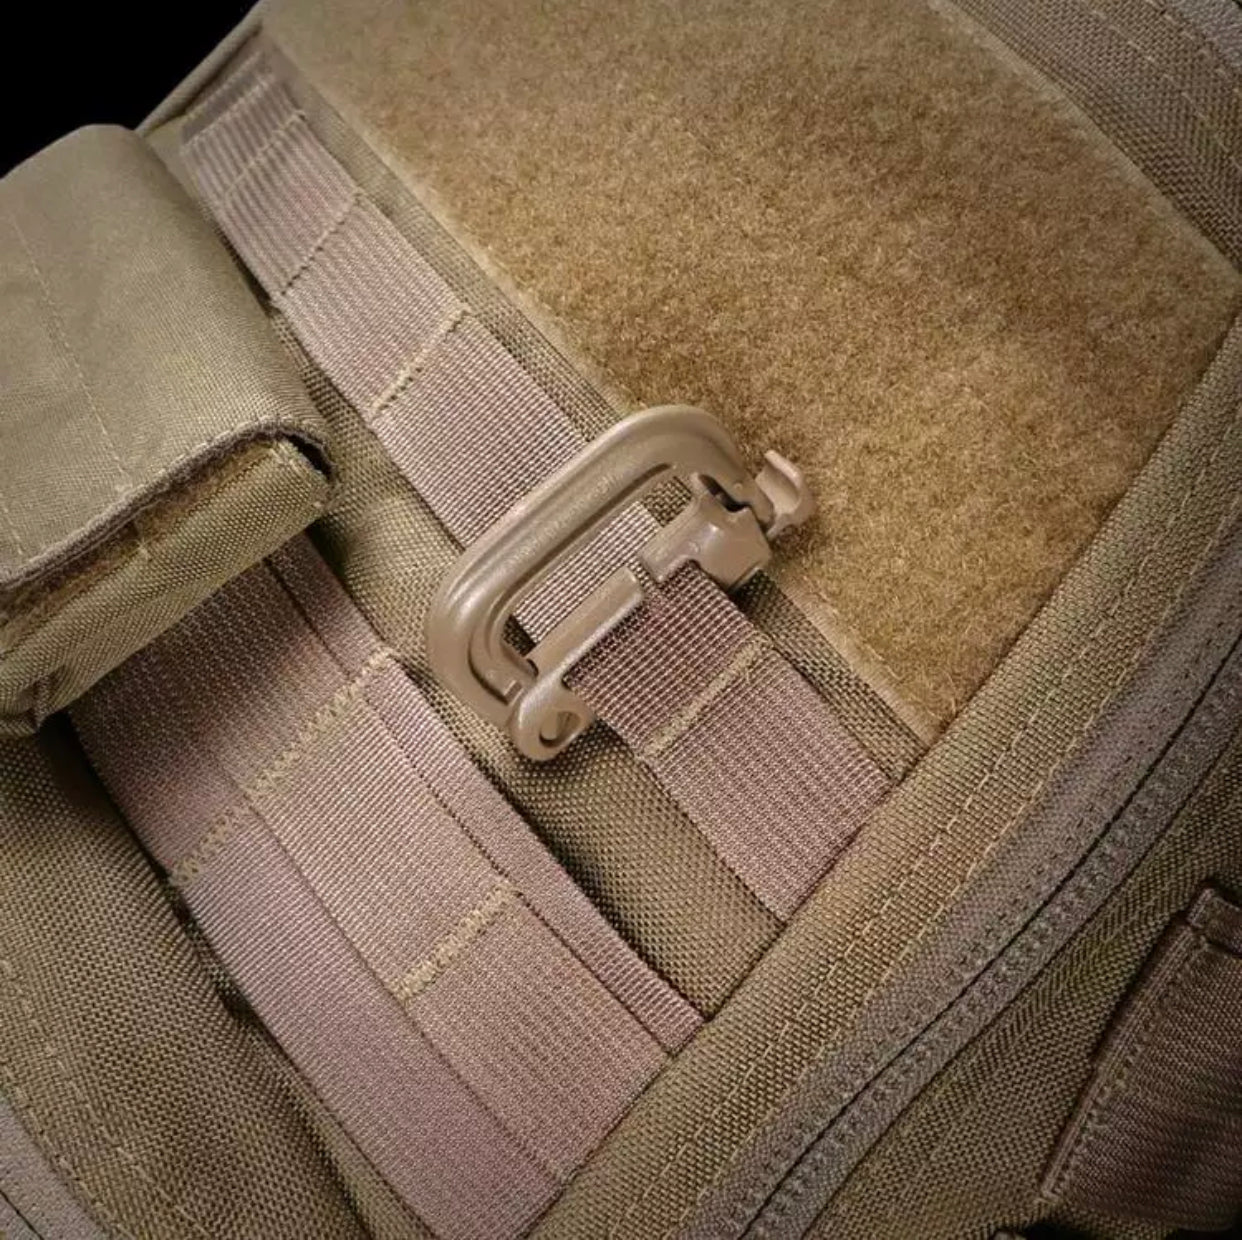 Tactical bag molle D ring attachment